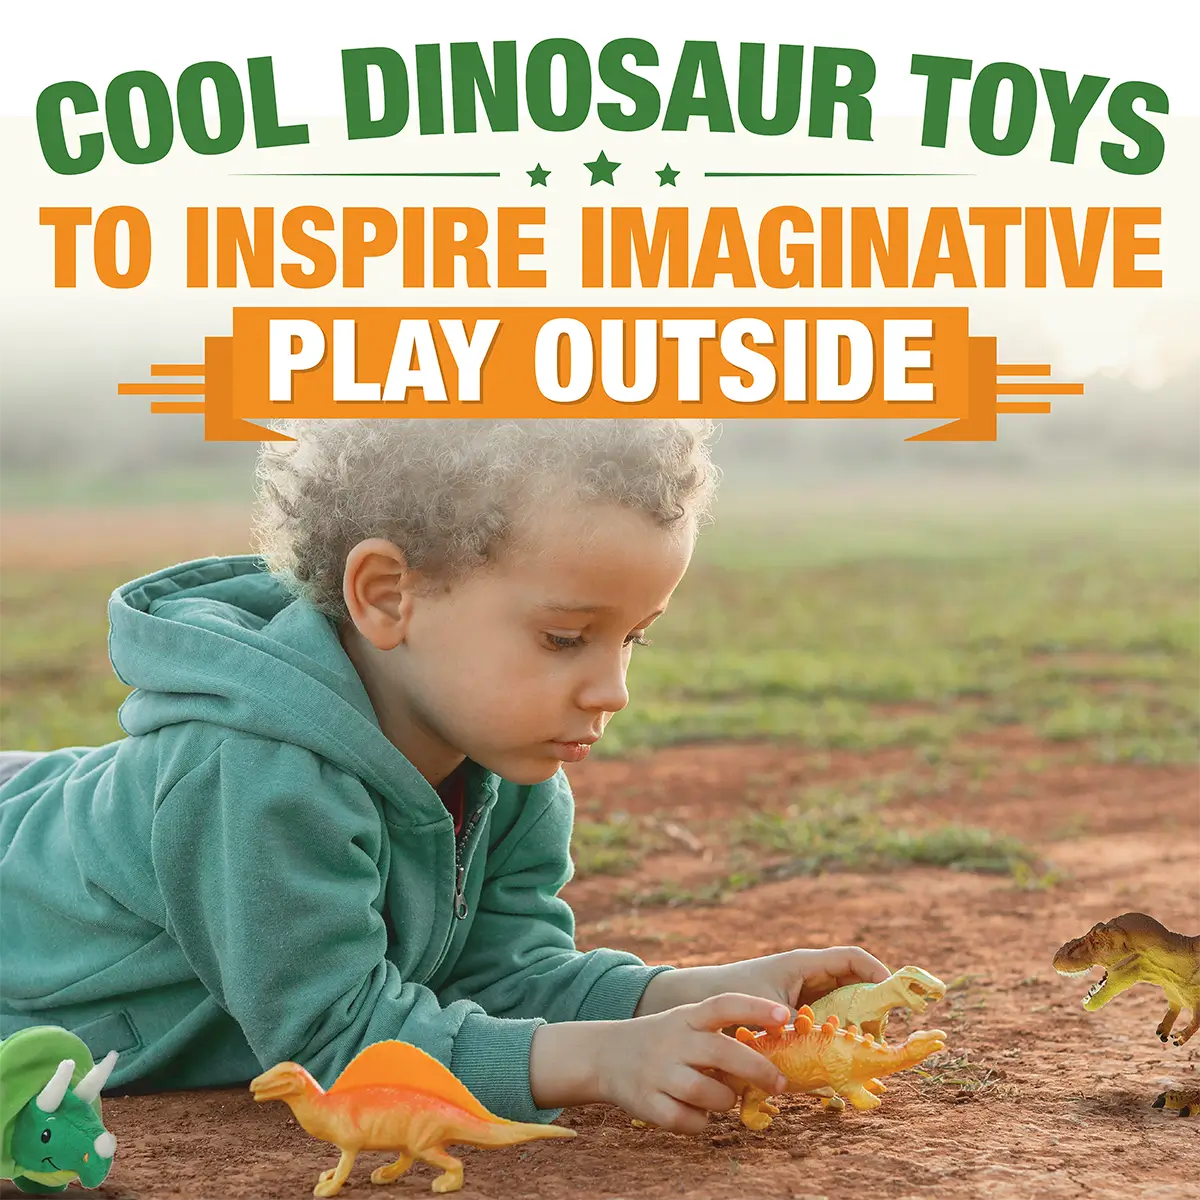 Why Choose Highly-Detailed and Anatomically Correct Animal Toys?